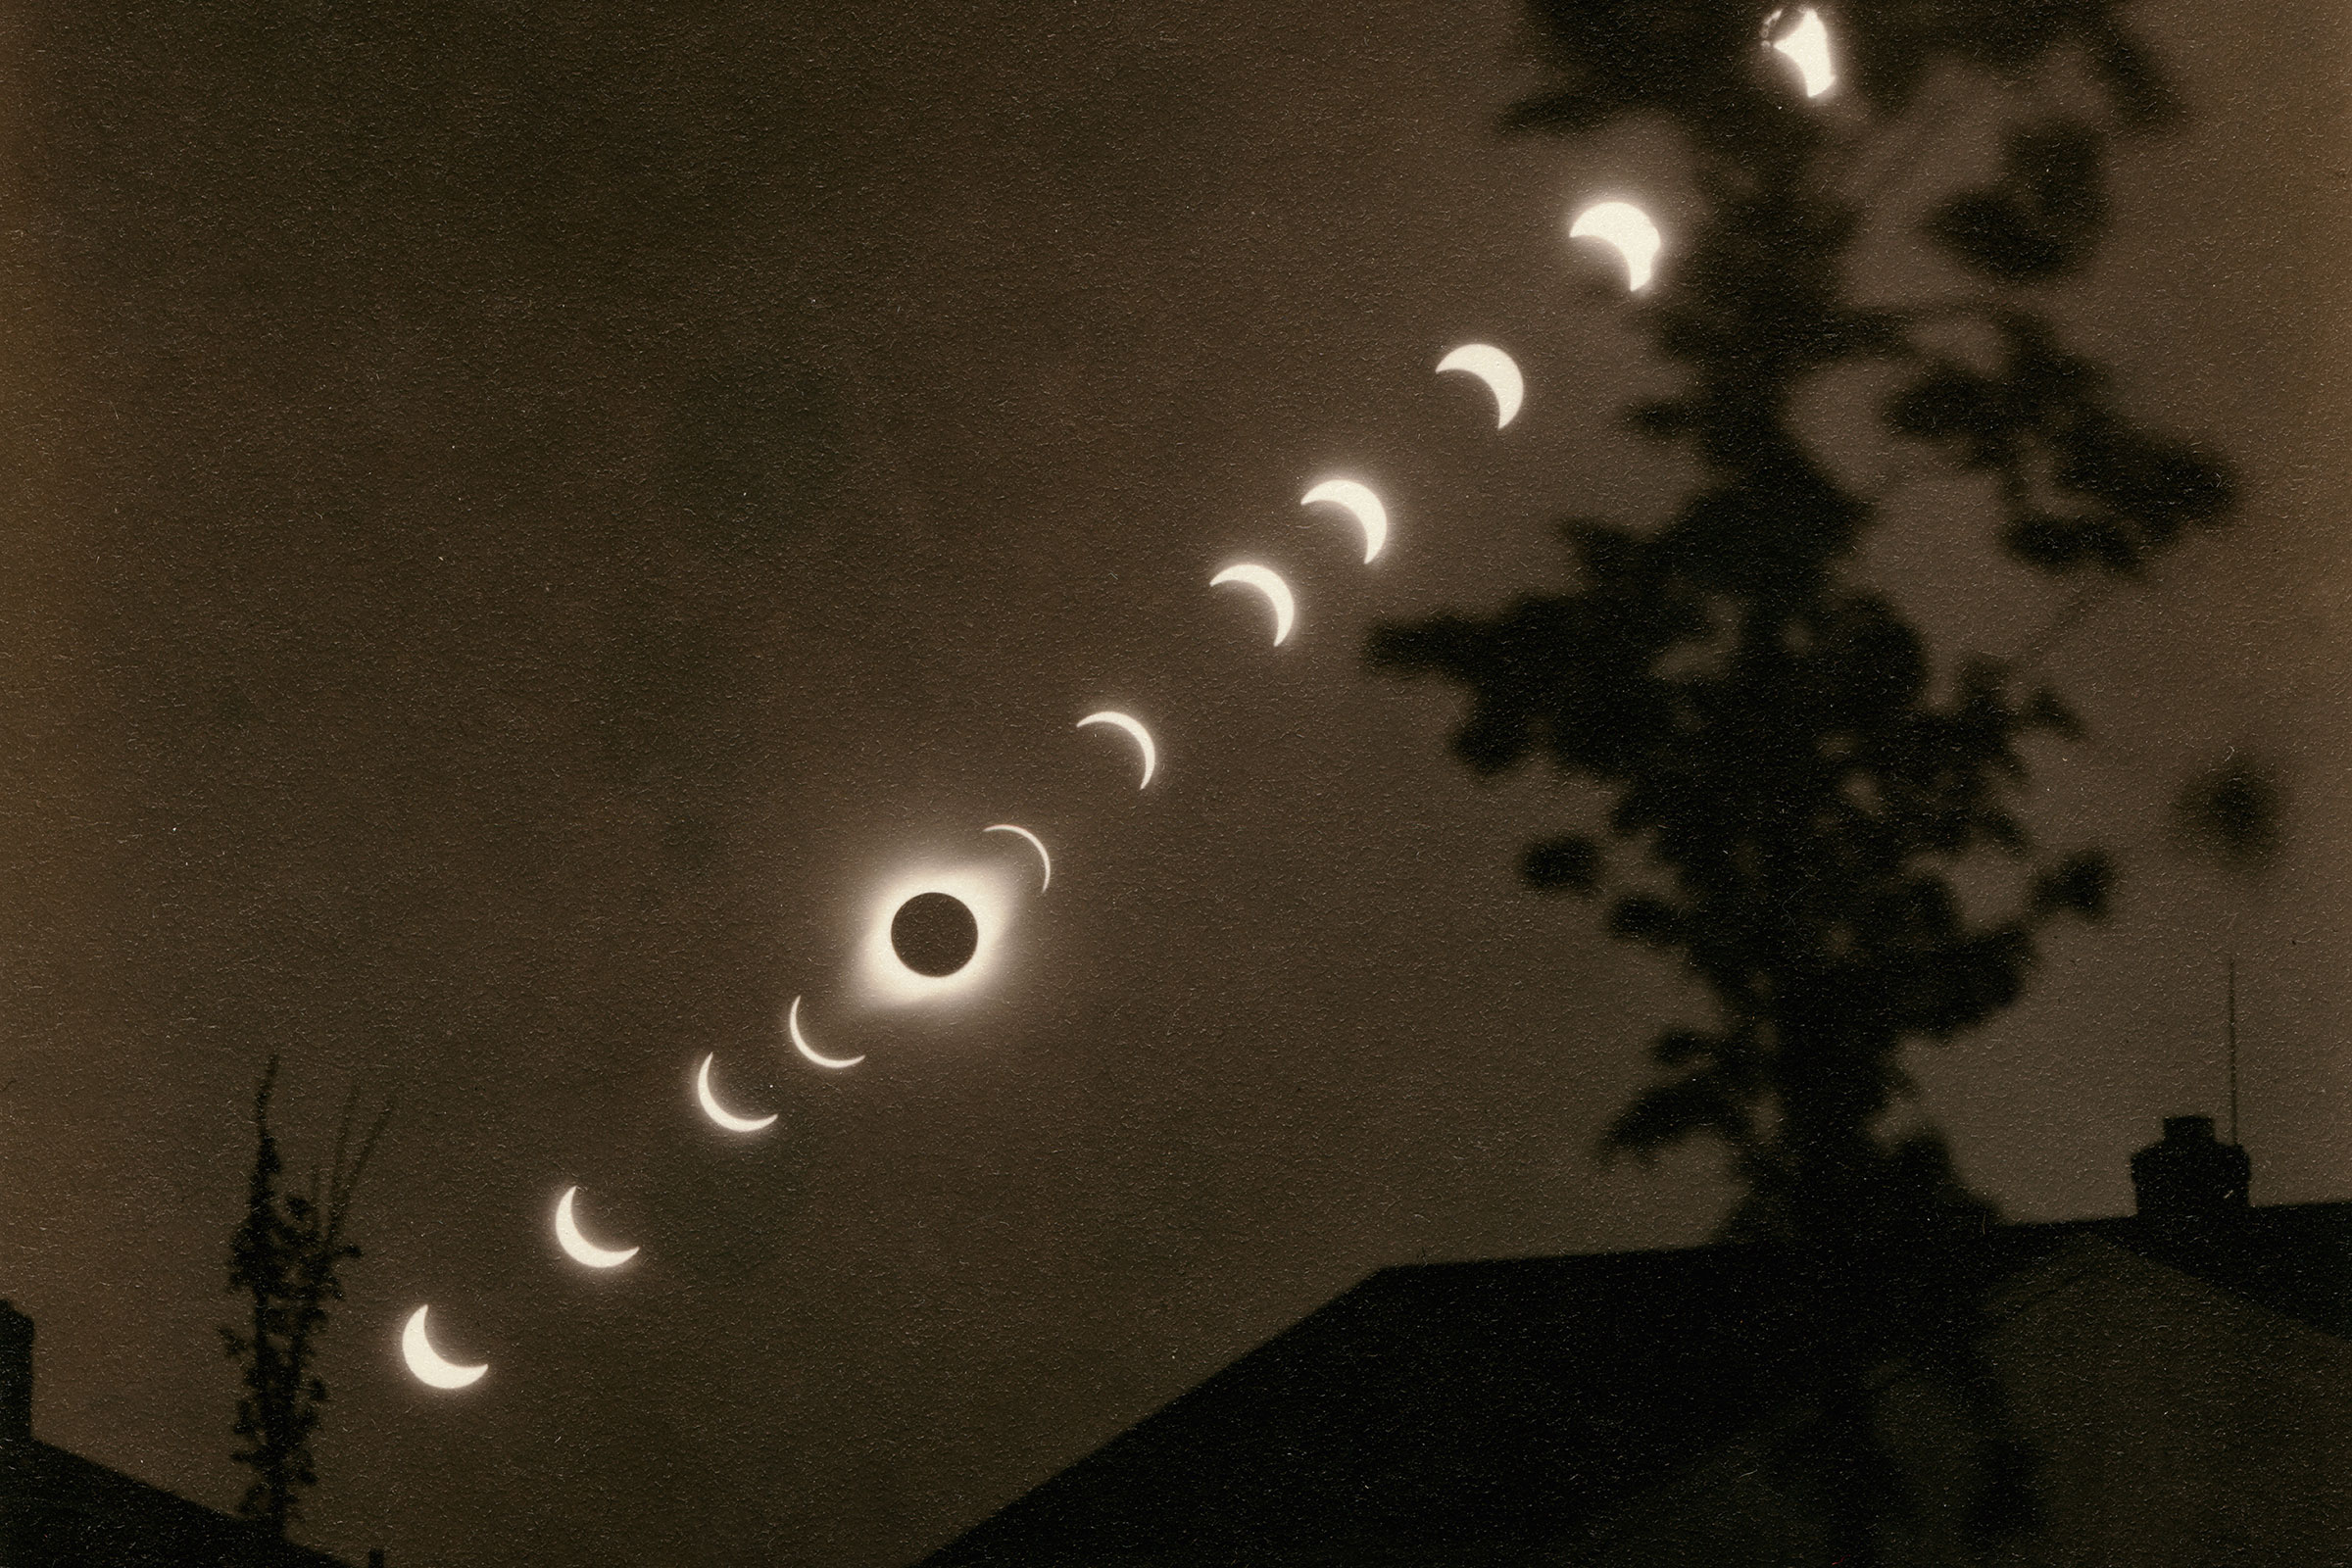 7 Memorable Eclipses From the Last 250 Years